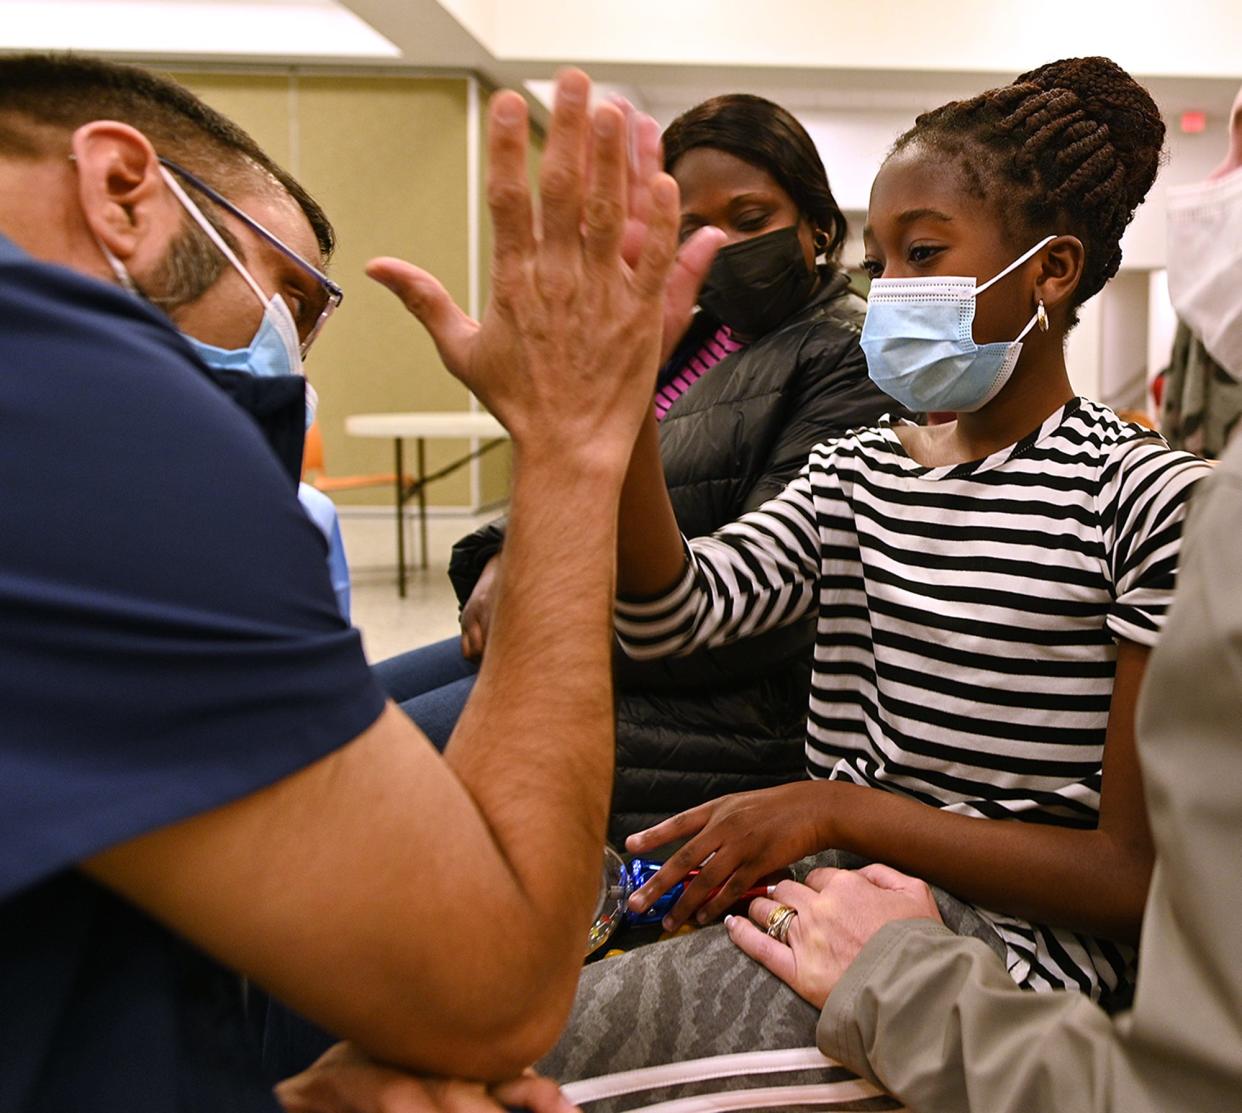 Paisley Twum, 11, high-fives Dr. Dahod Idris after Twum received a COVID-19 vaccine at the Boys & Girls Club of Worcester.